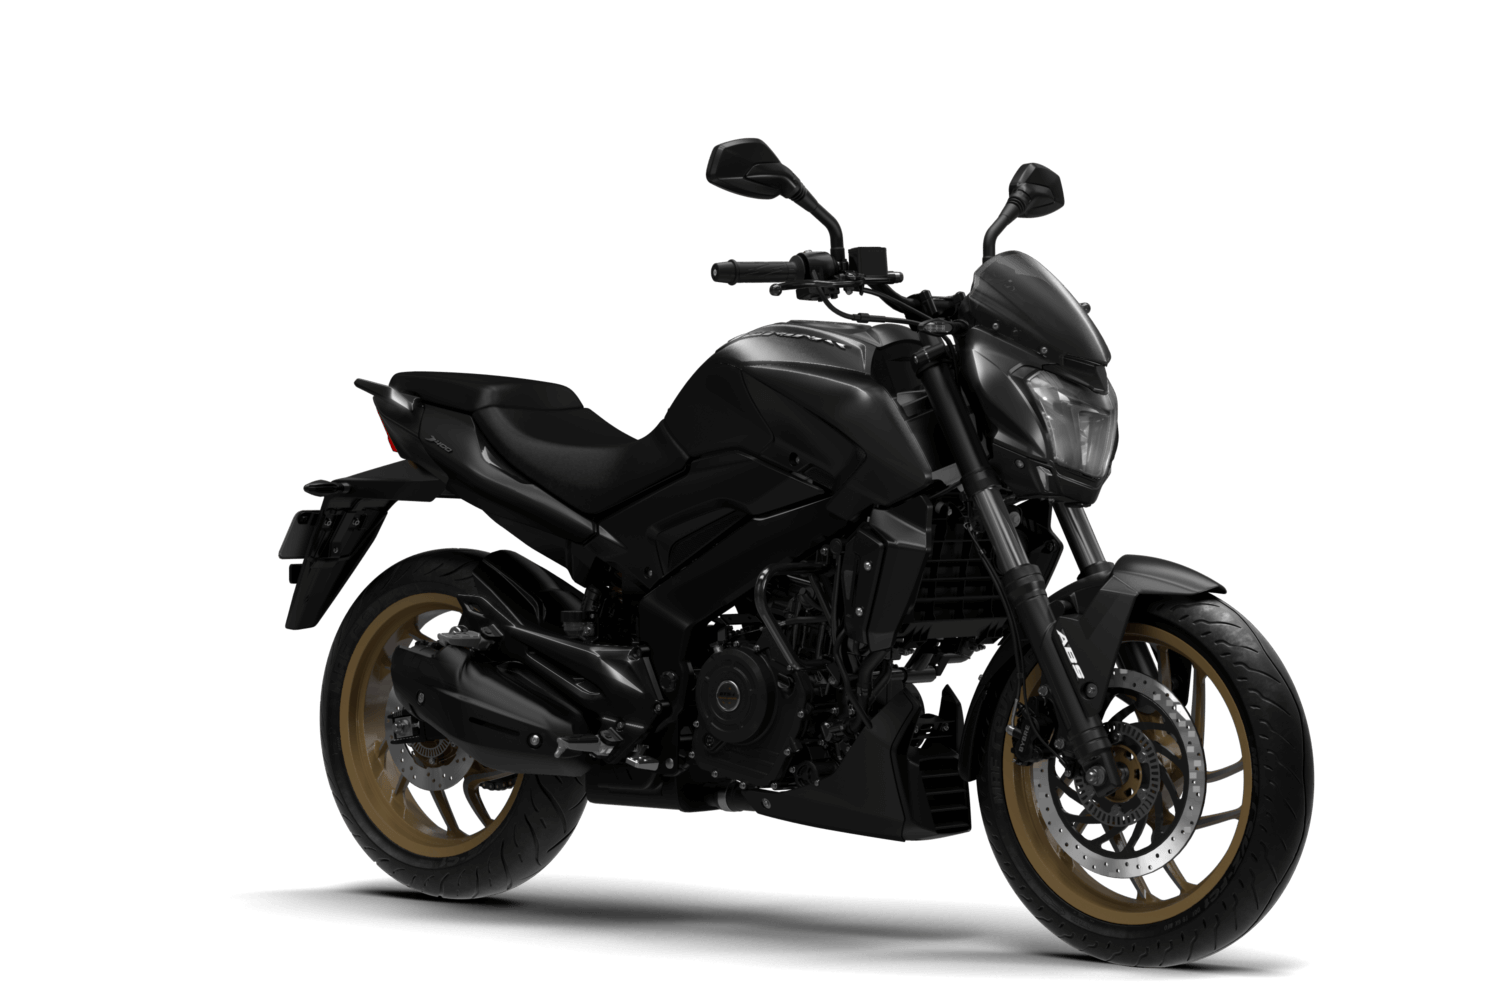 Bajaj DOMINAR 400 Specfications And Features